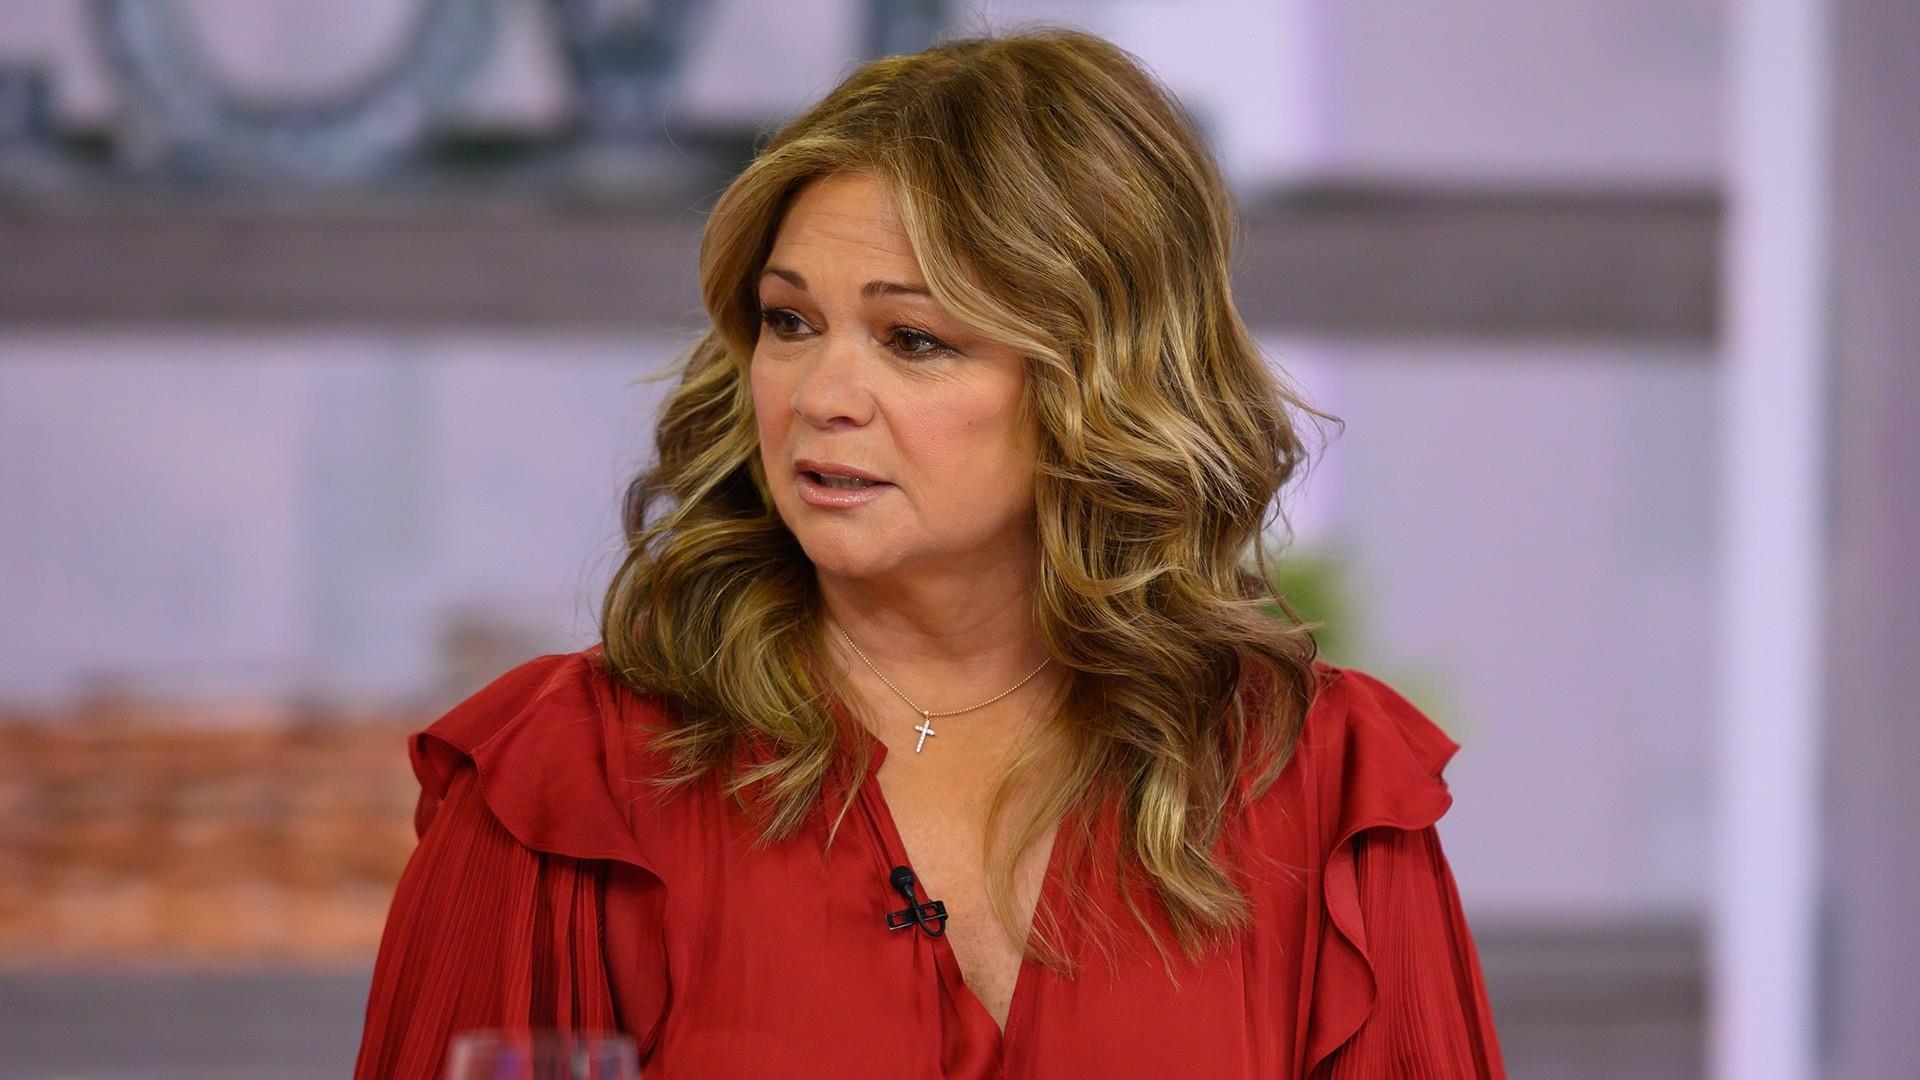 Valerie Bertinelli: I want to look at myself with 'pure love'